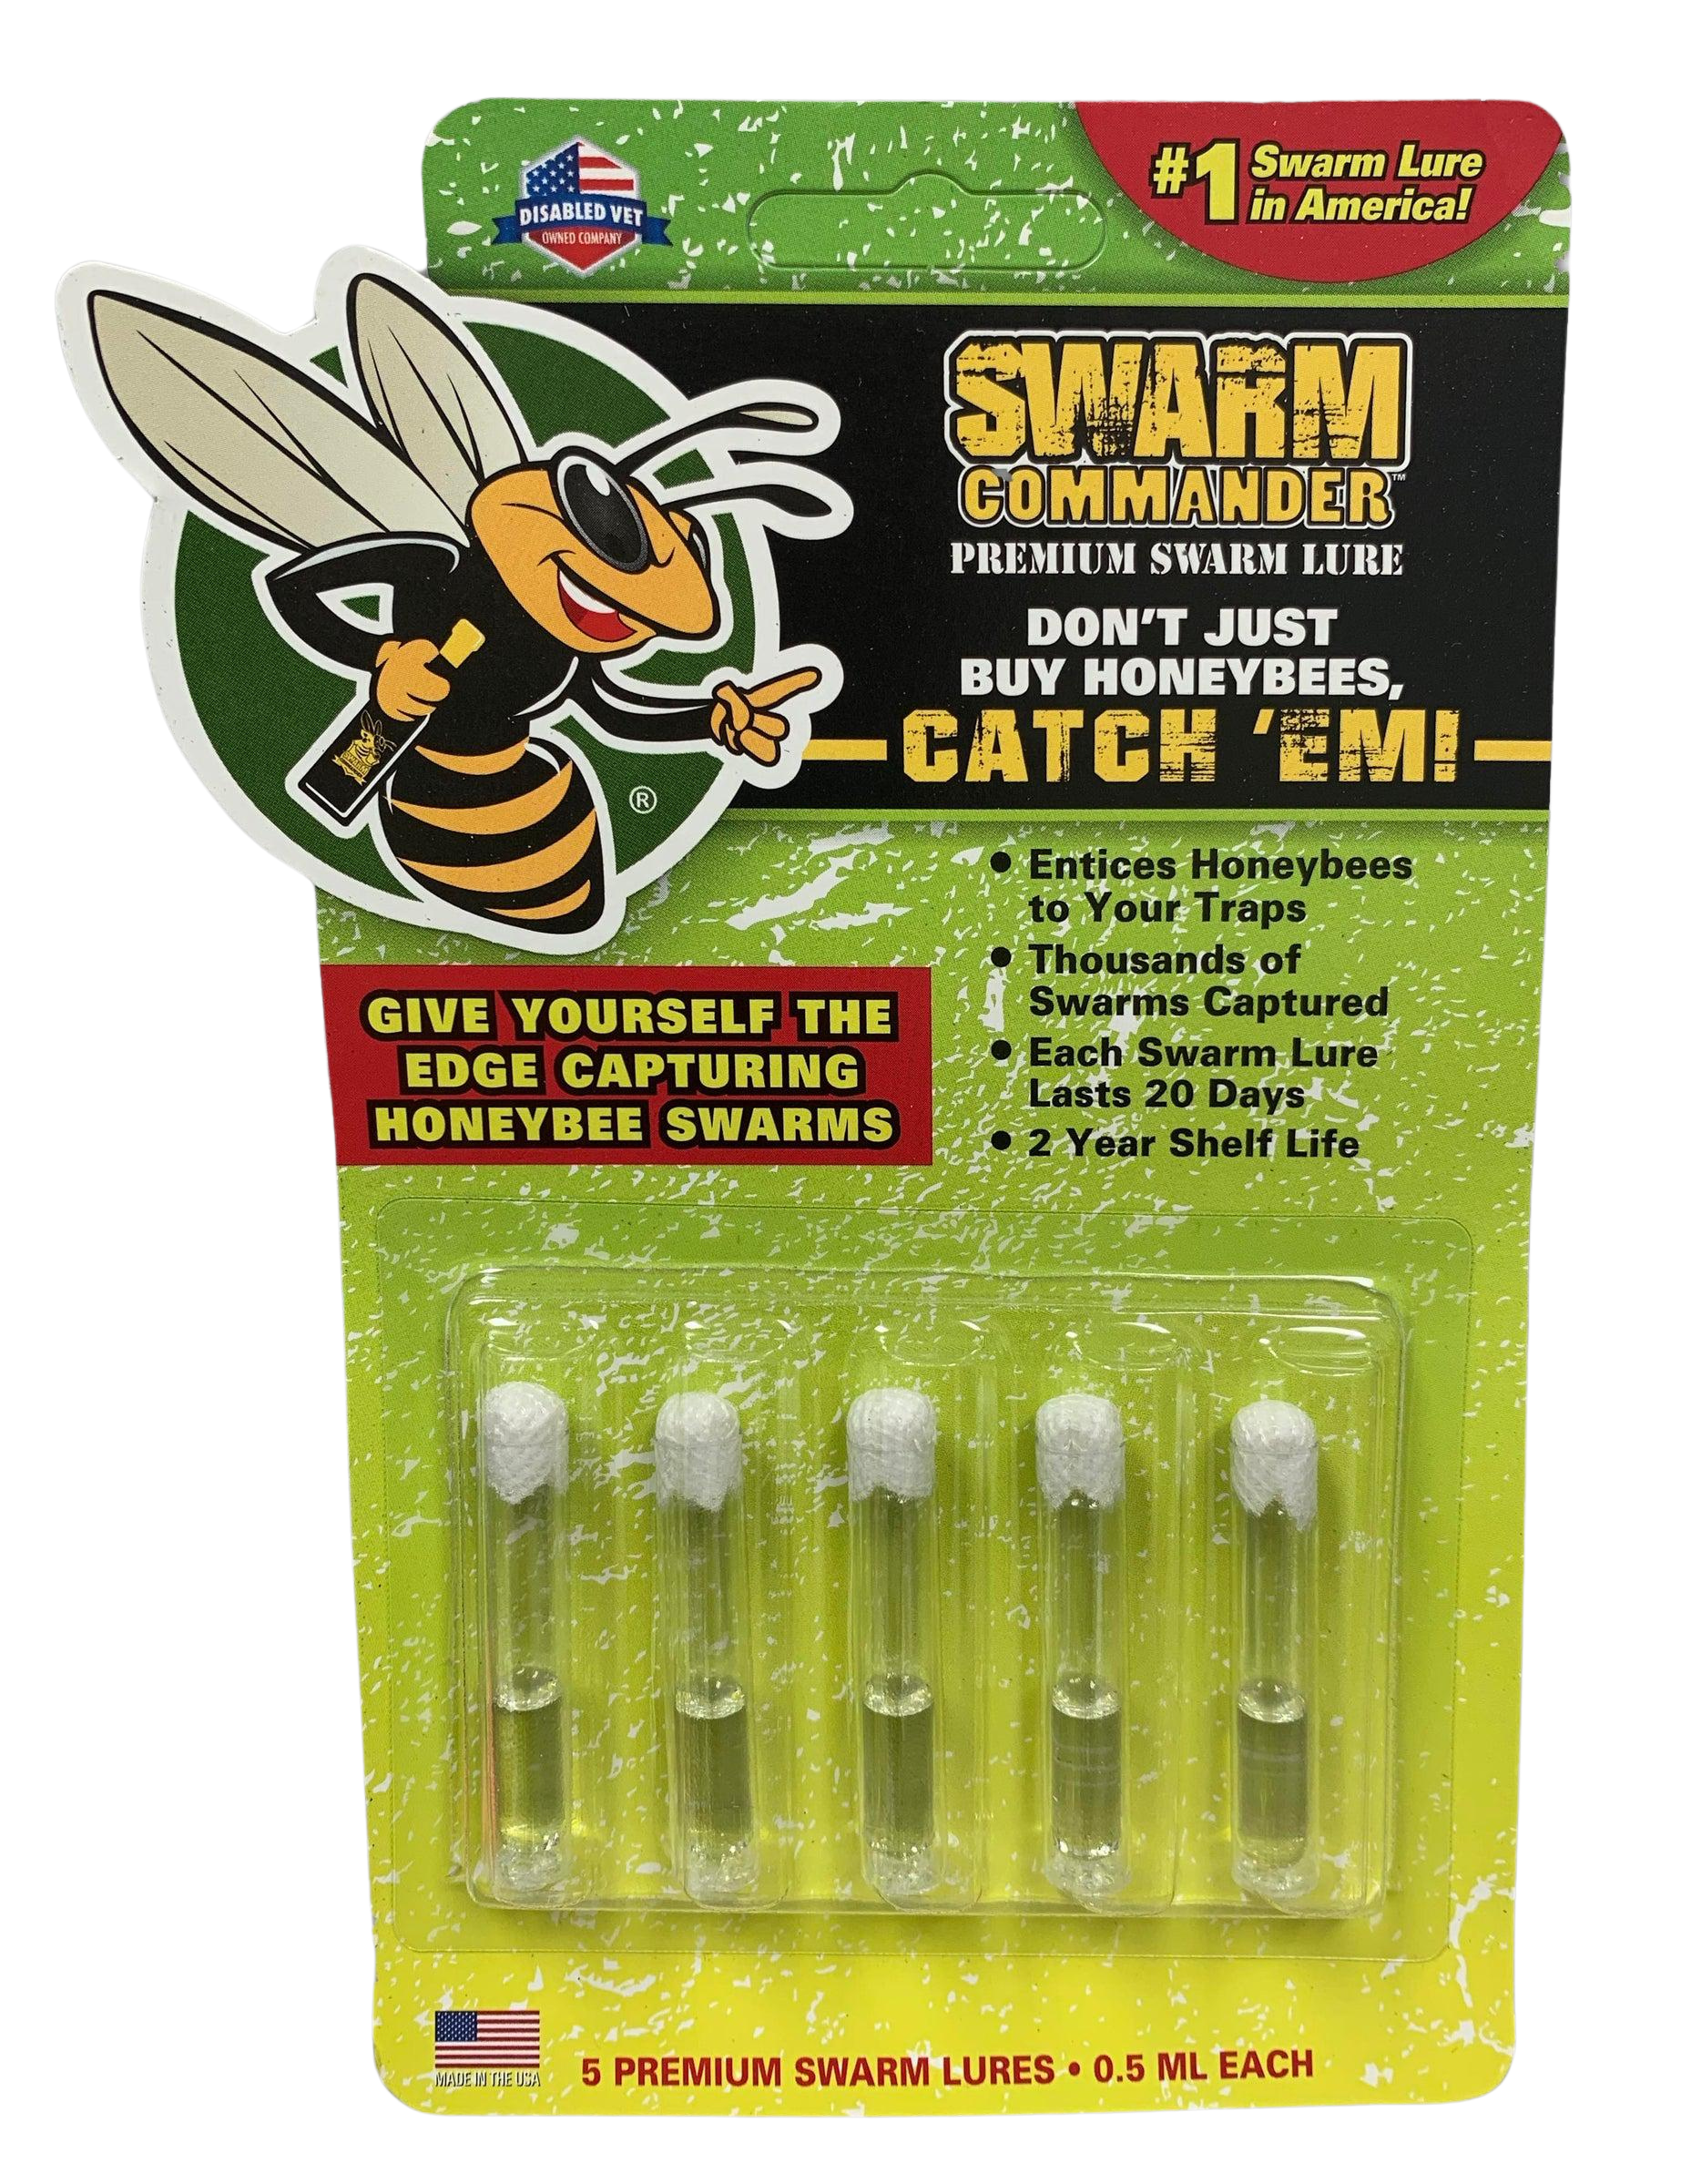 Multi-listing Honey Bee Swarm Lures / Baits for Trap or Hive Beekeeping  Free Bees International Shipping. 